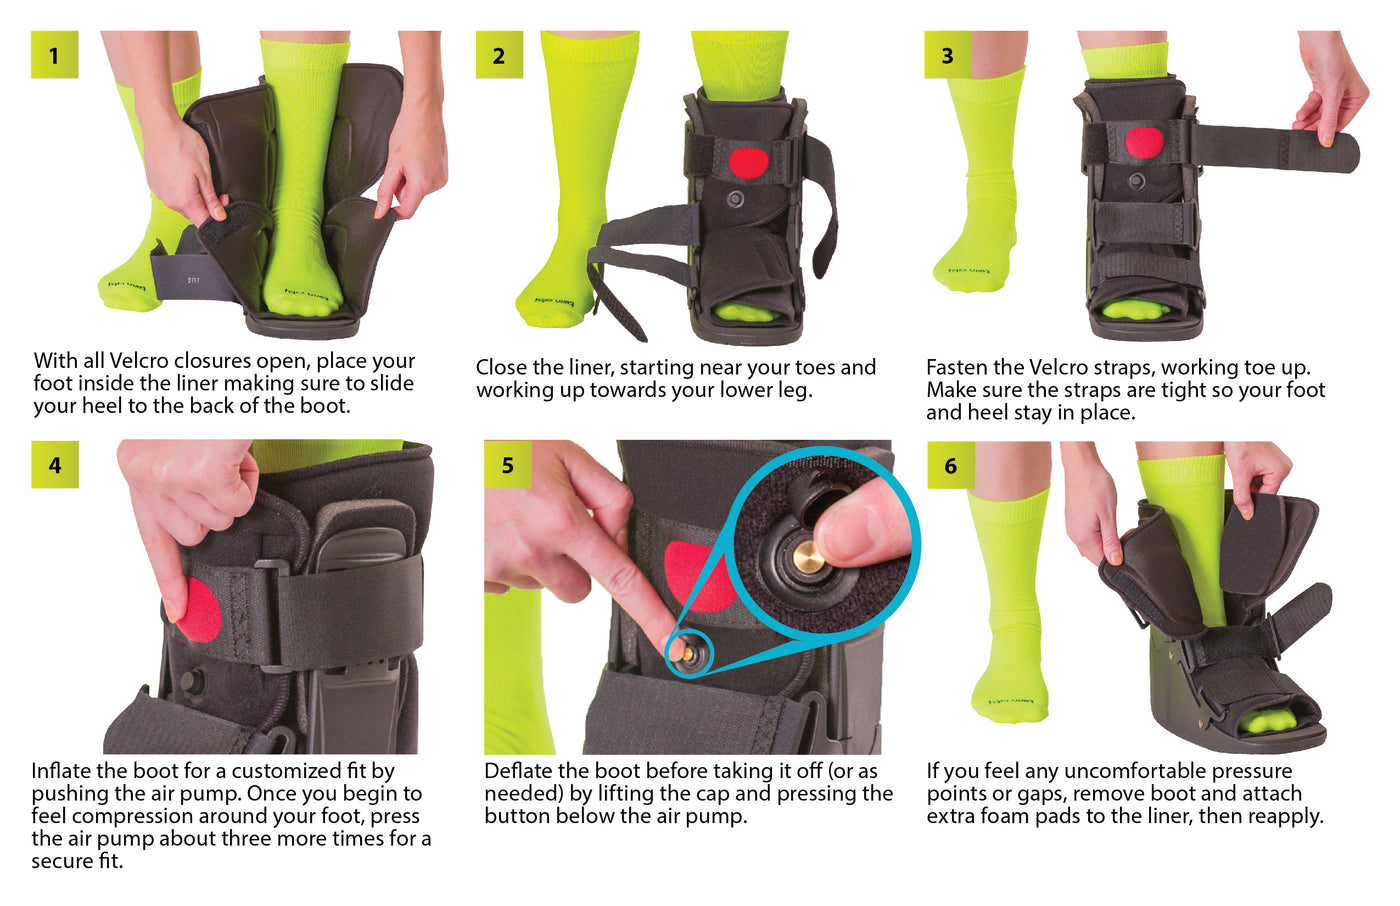 How to put on the short air walking boot instruction sheet